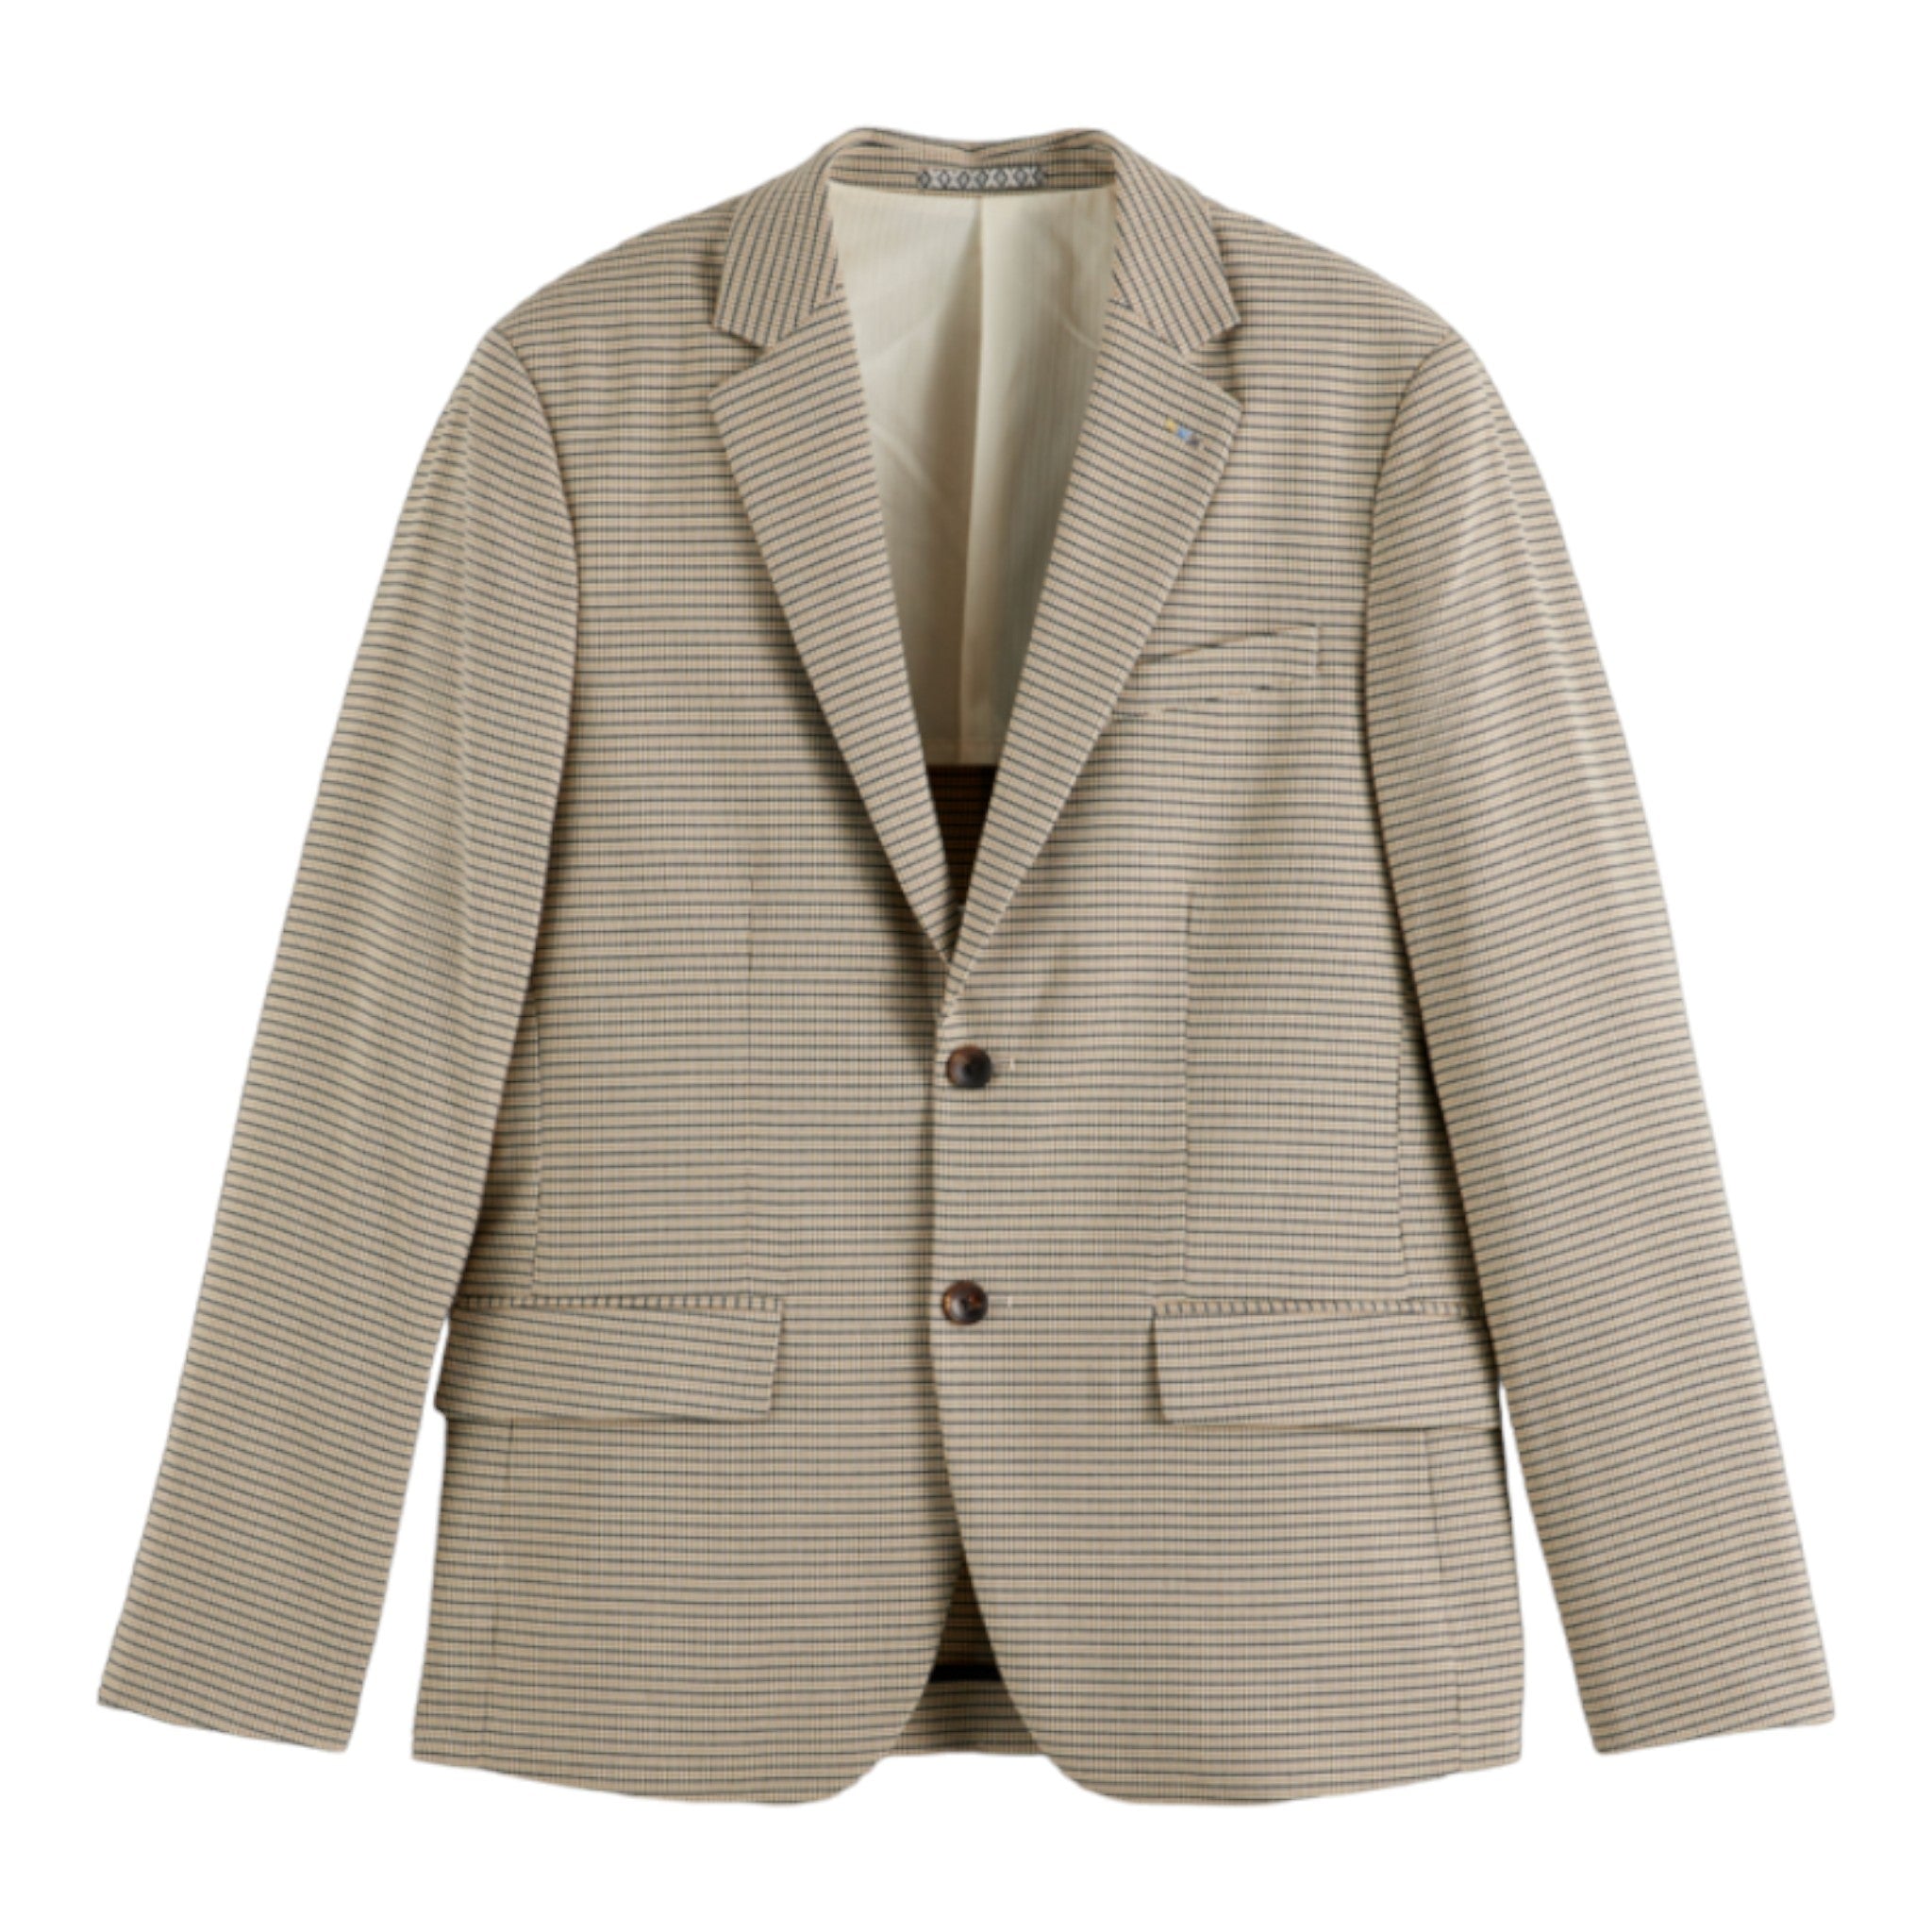 Tan striped blazer with front pockets 